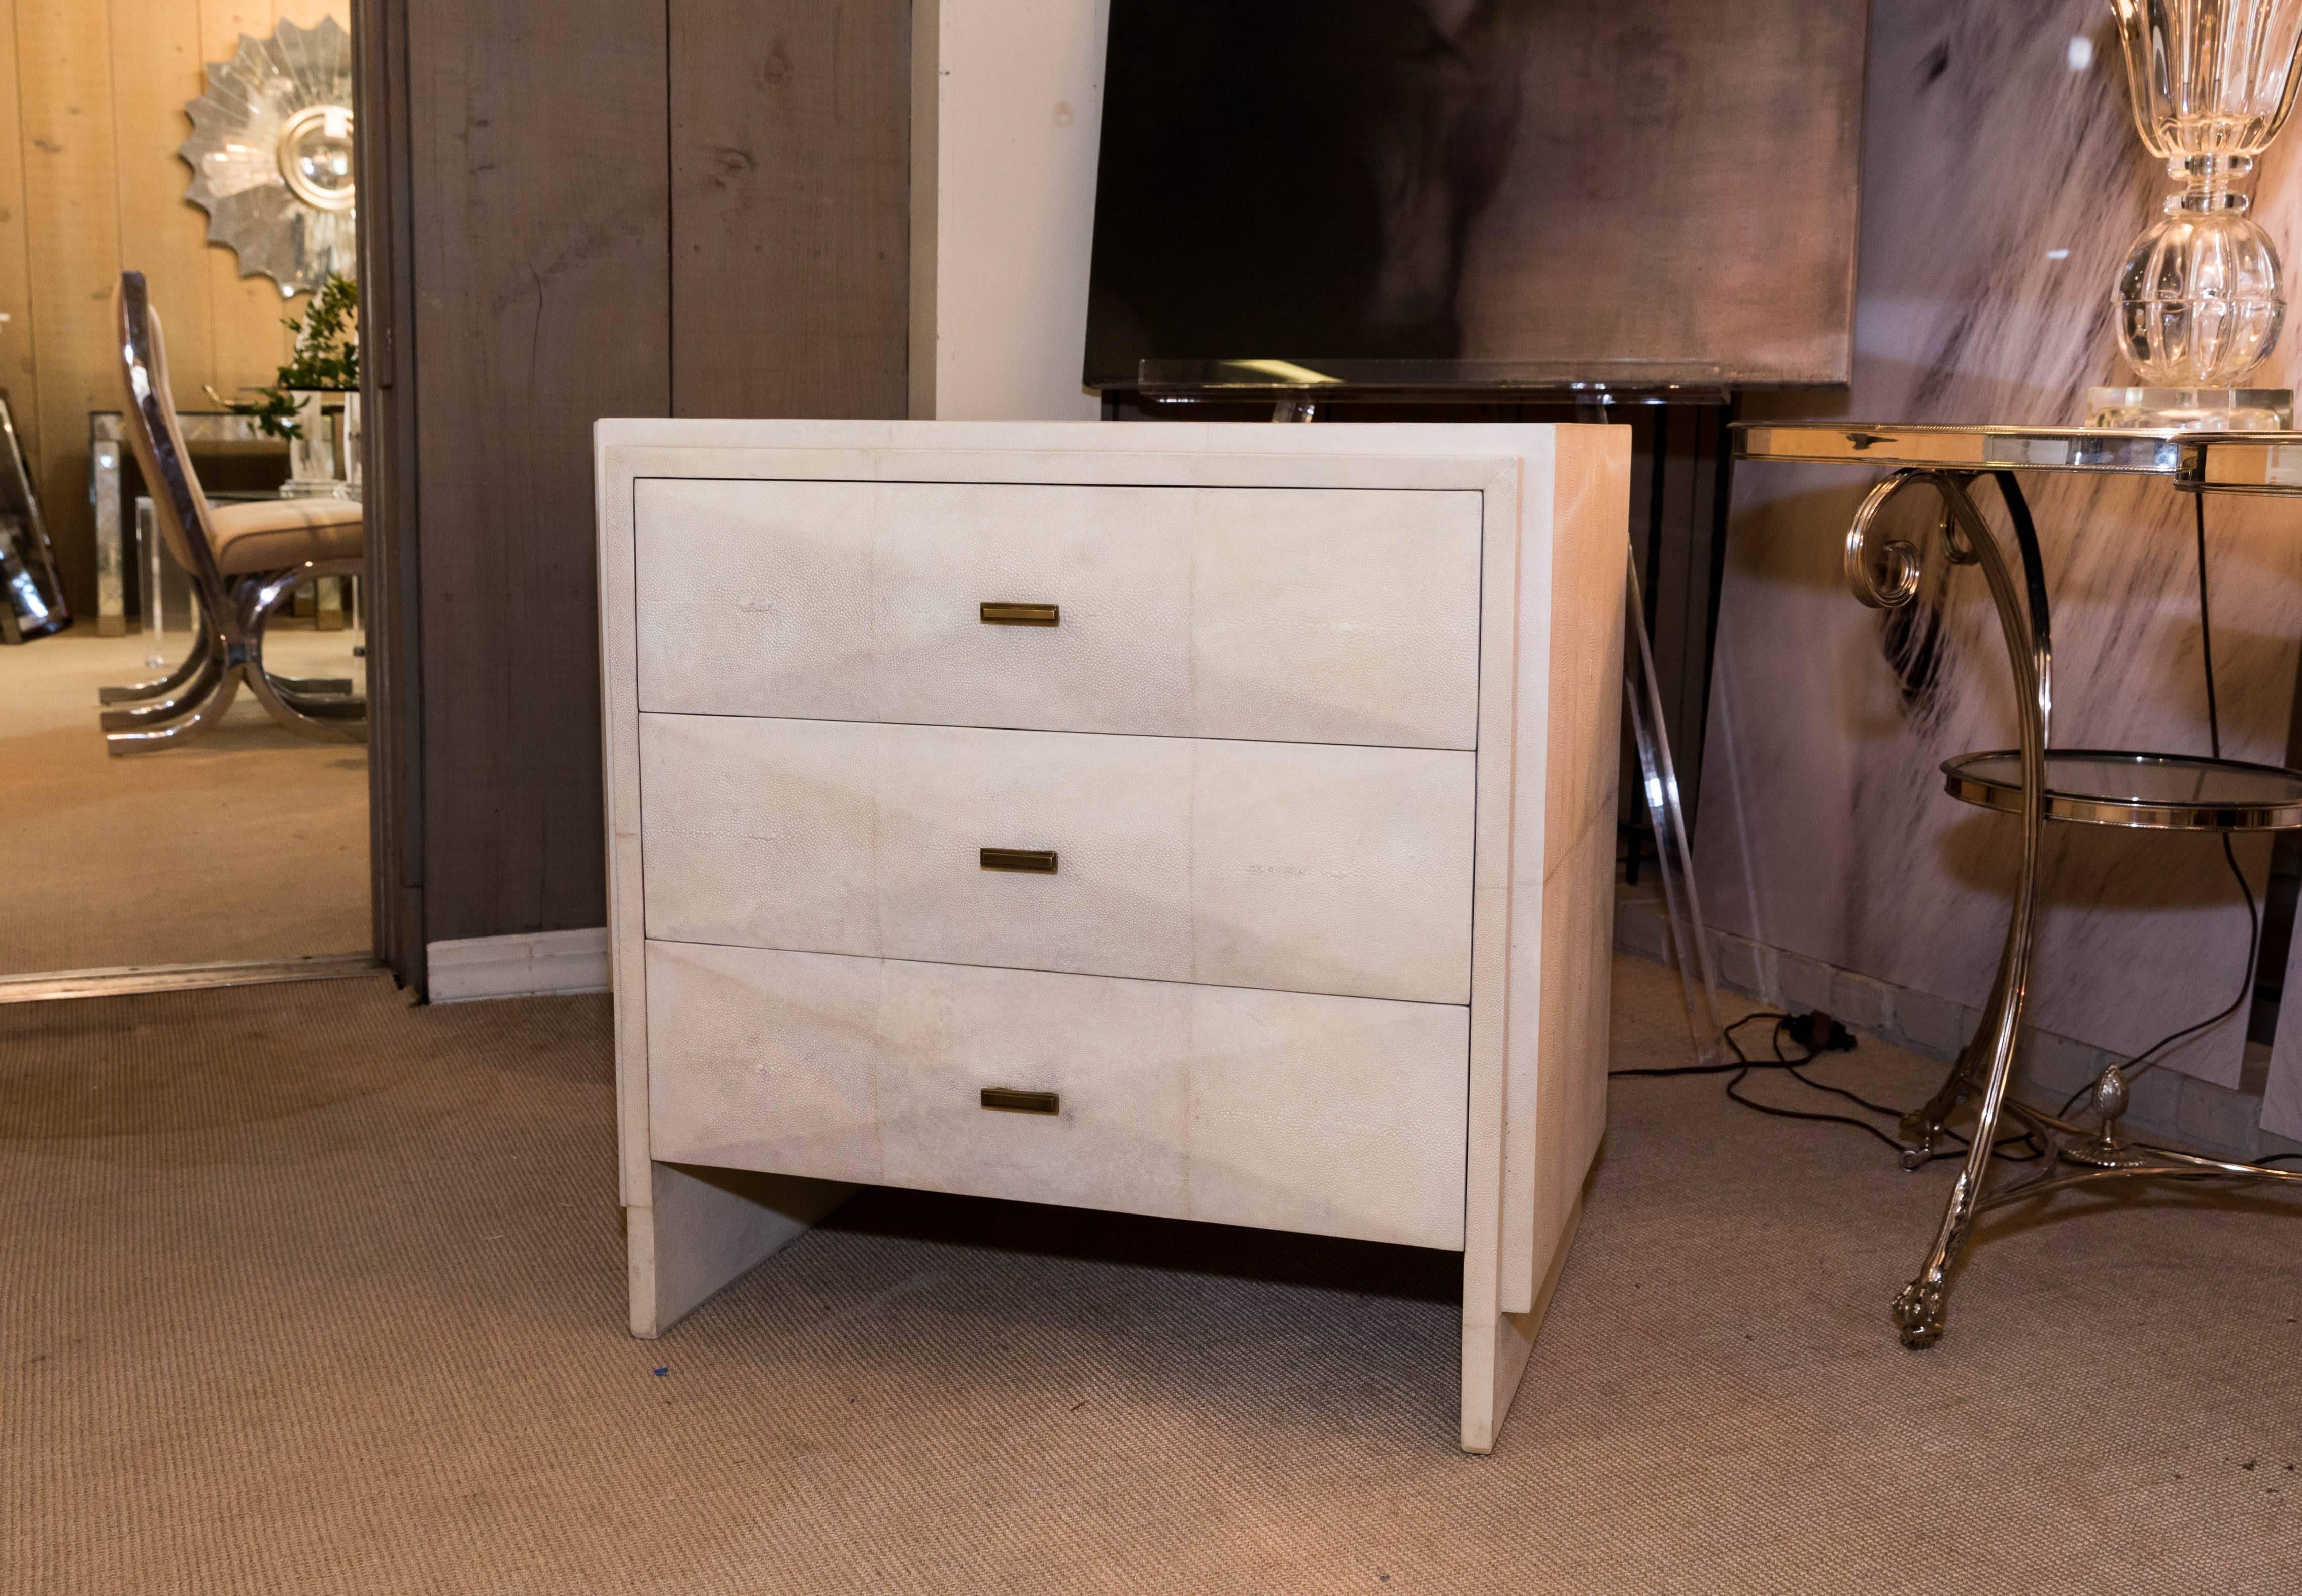 Attractive pair of white shagreen three-drawer nightstands with bronze drawer pulls.